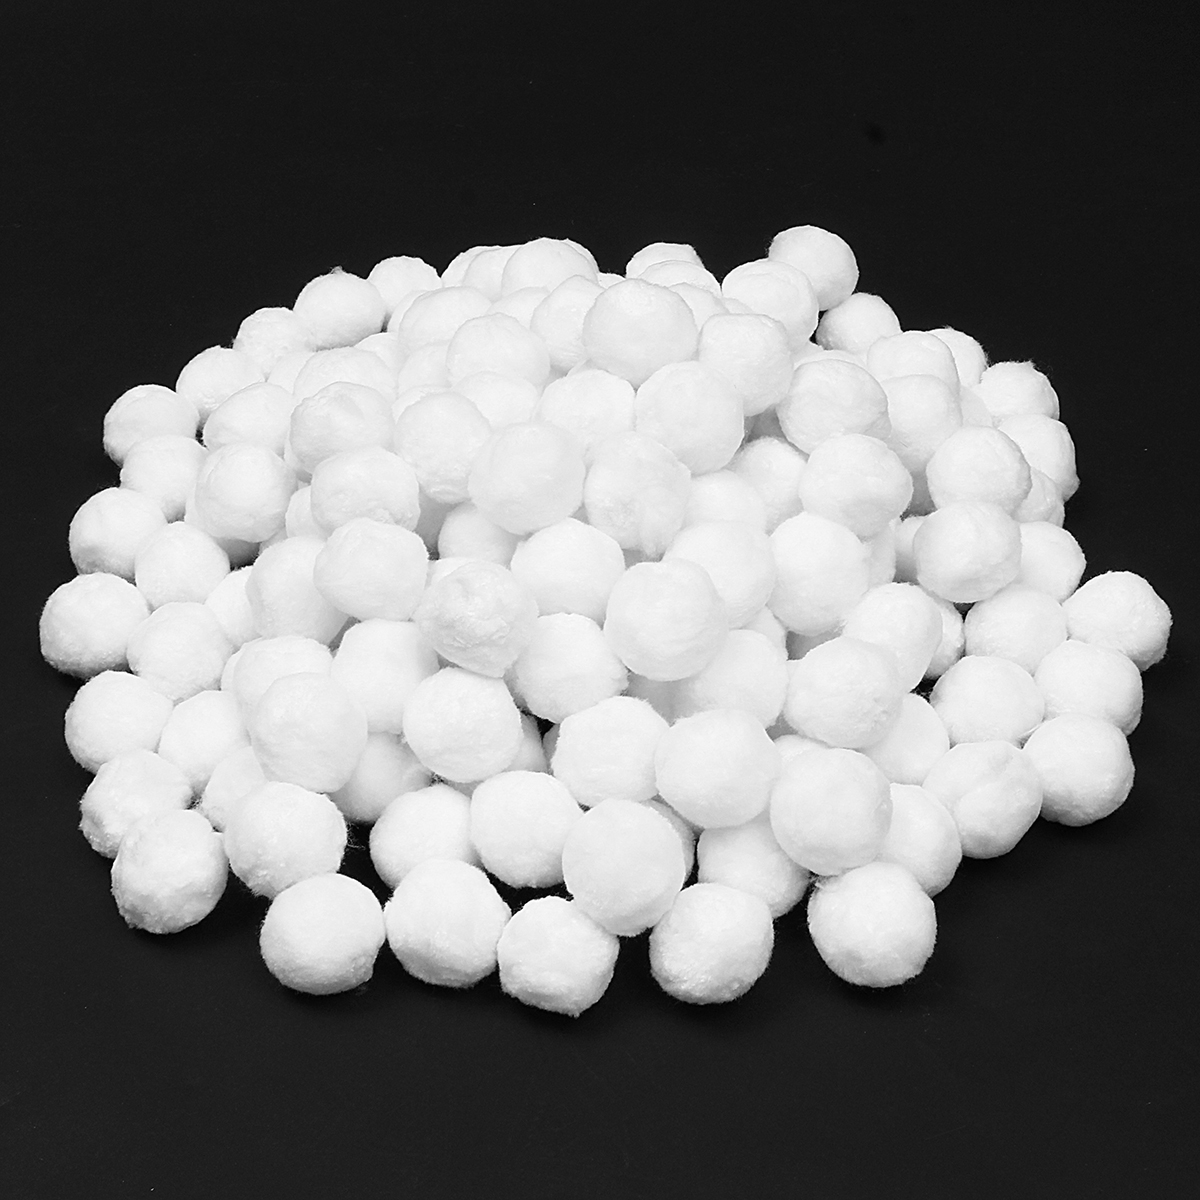 

500g Pool Filter Balls Water Treatment Reusable Renewable Eco Friendly Polyester Filters Balls